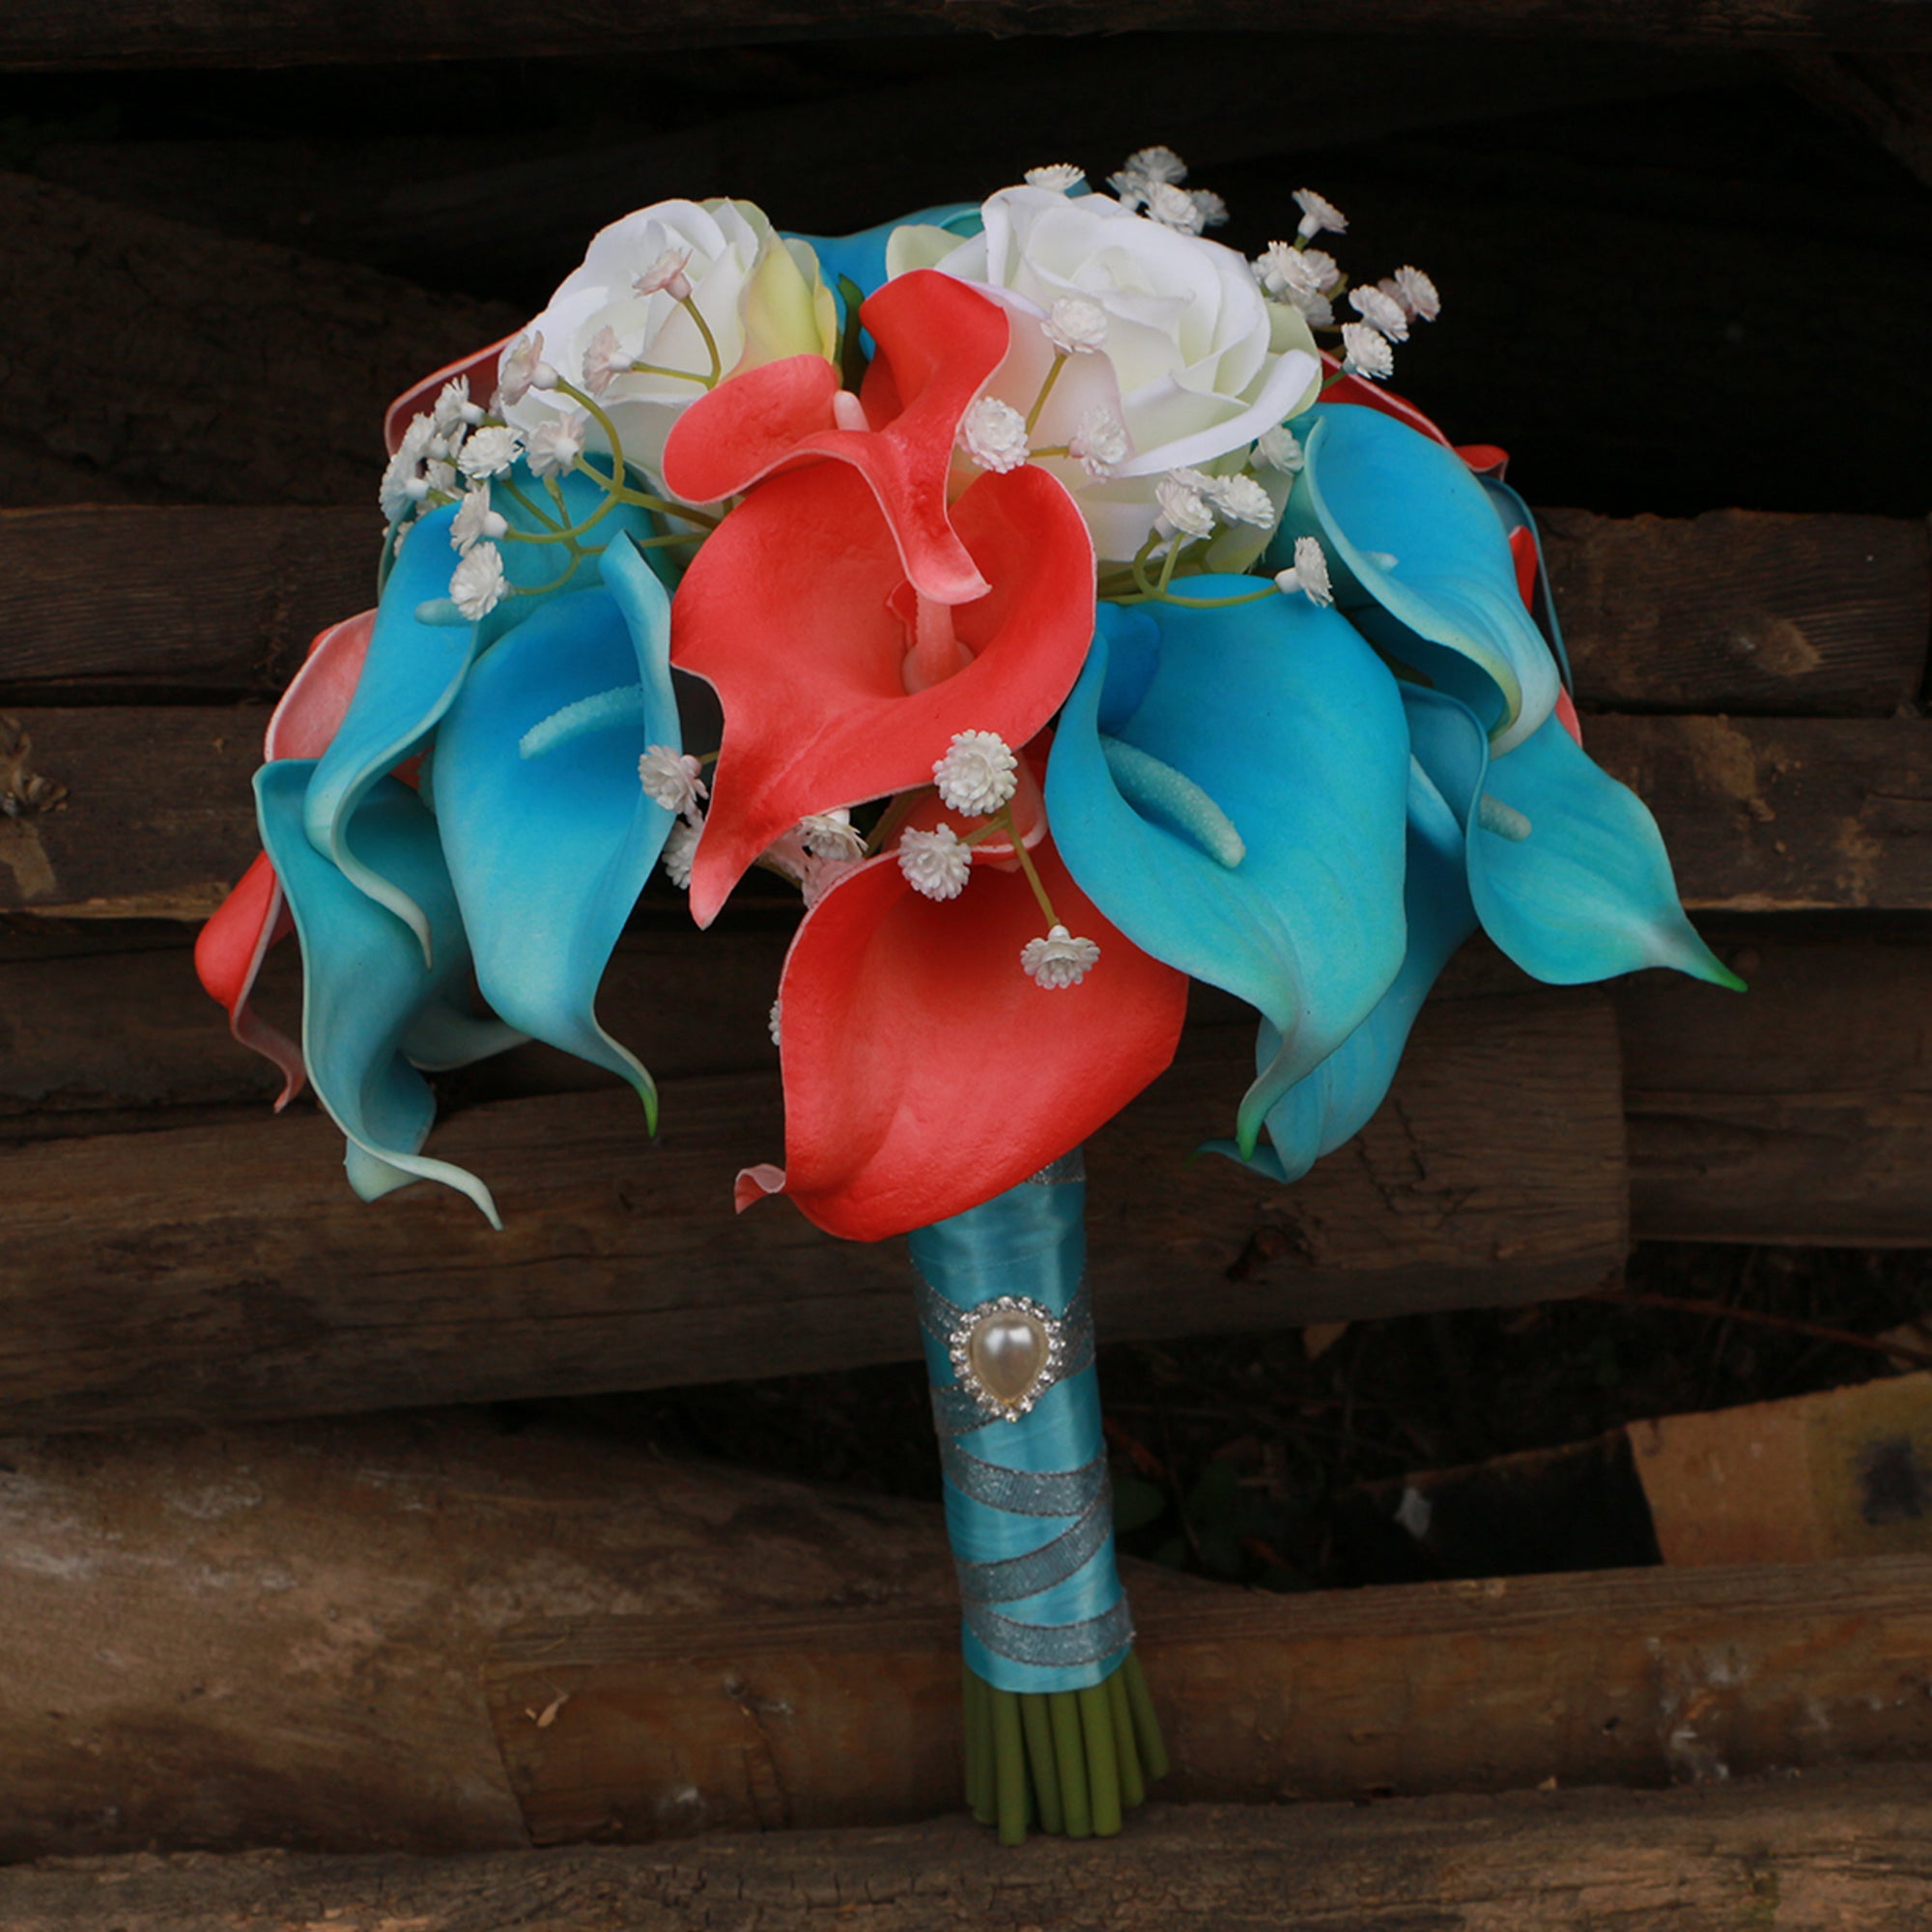 Turquoise and Coral Calla Lily Bouquet for Bridal Wedding Flowers